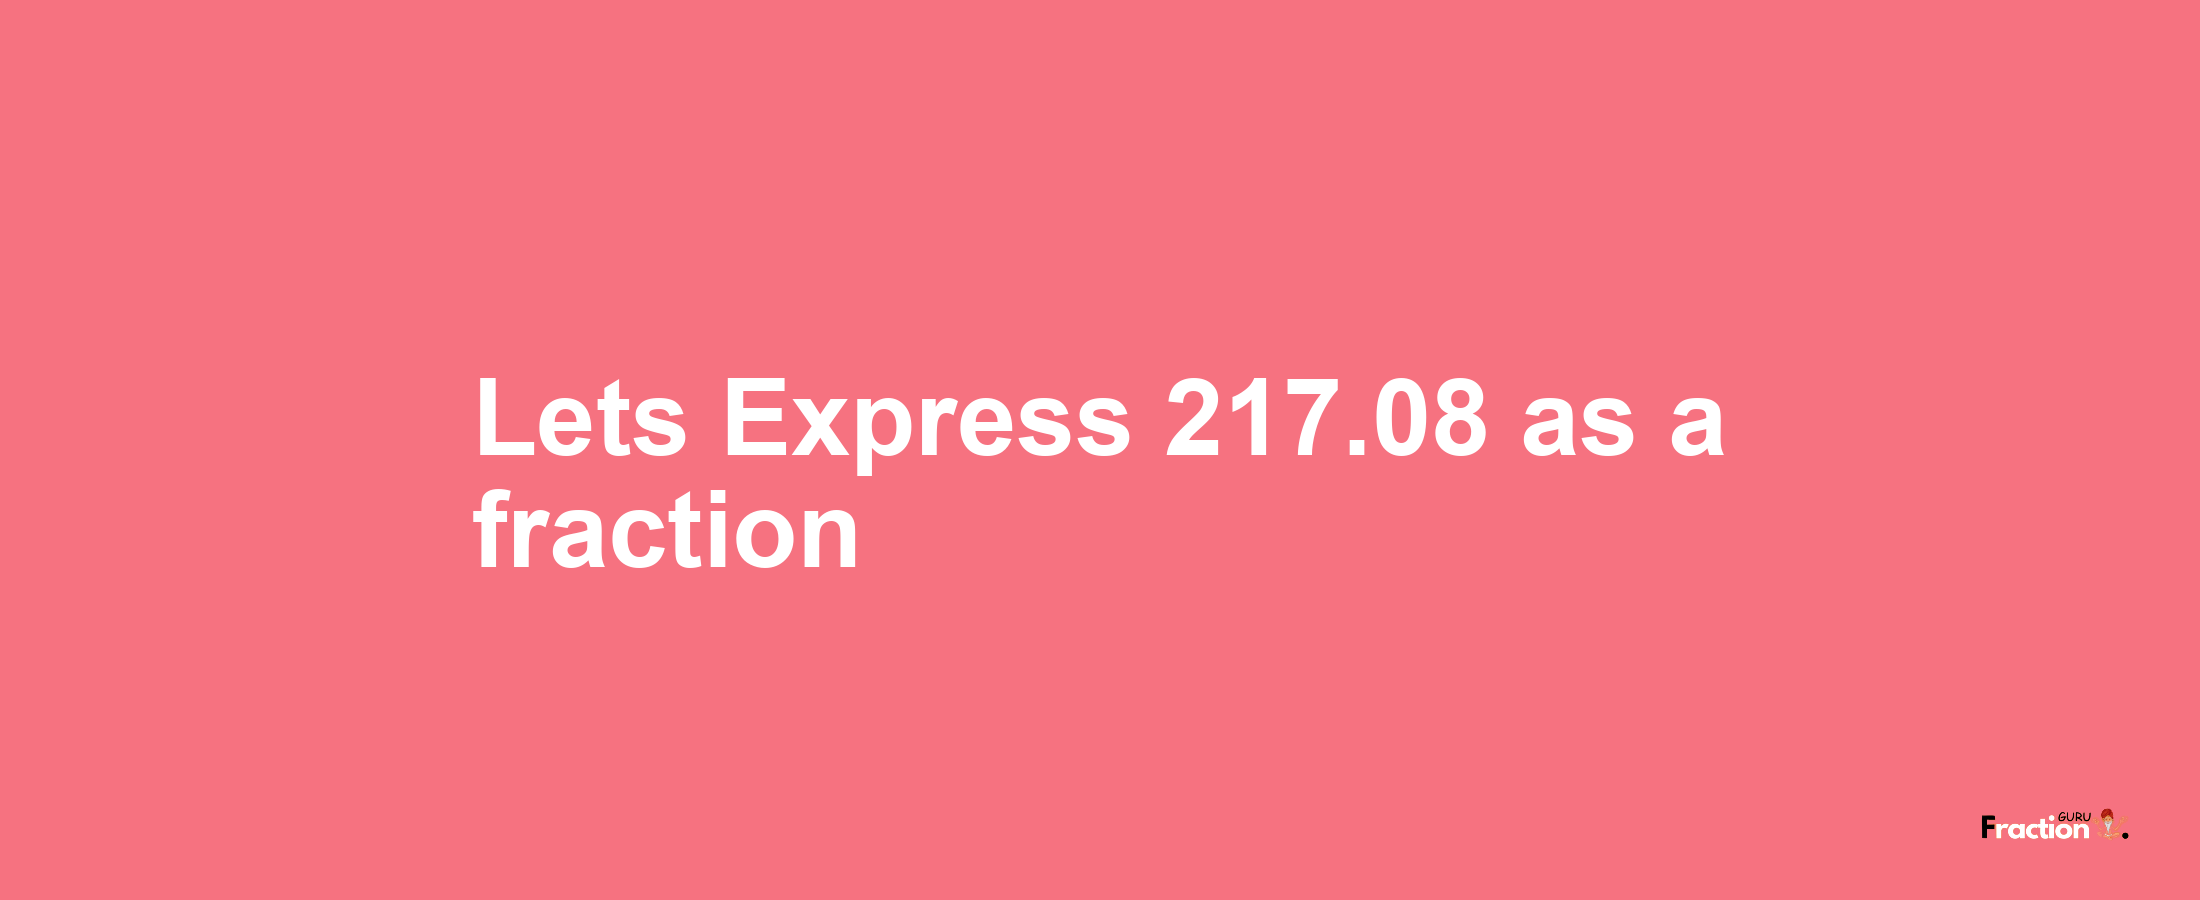 Lets Express 217.08 as afraction